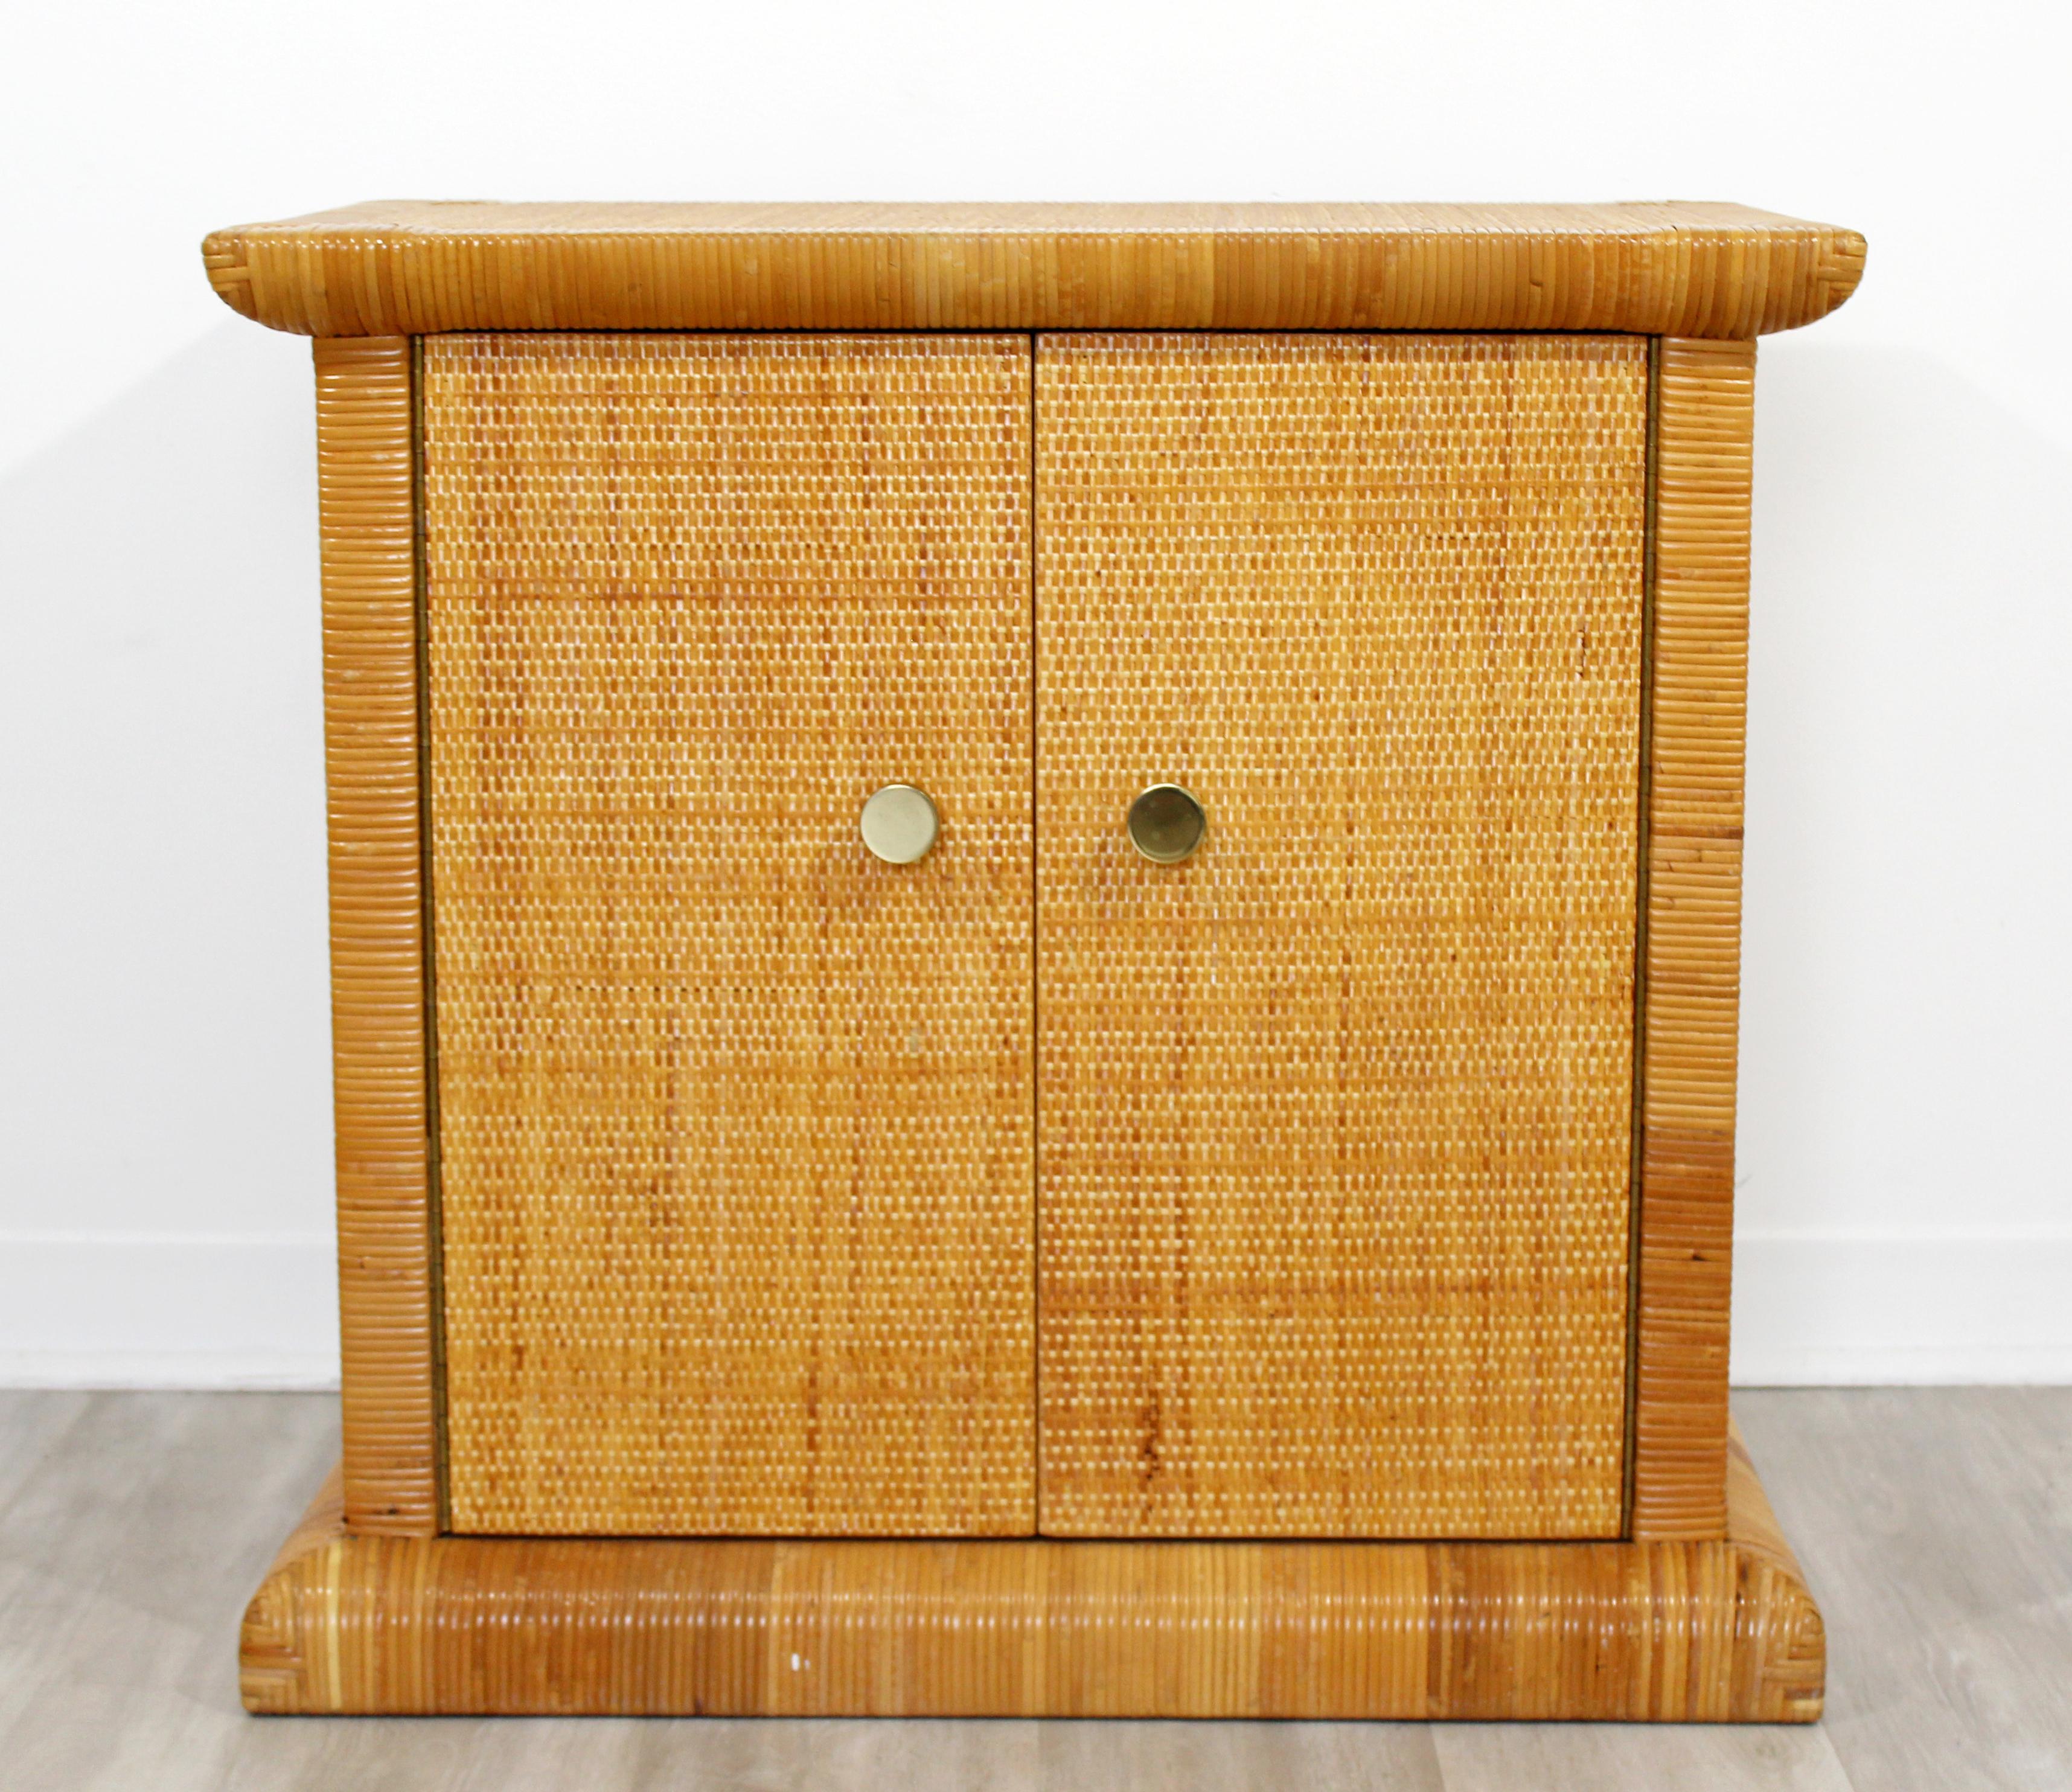 For your consideration is a charming, cane rattan and brass side cabinet, with two doors and one shelf, by Bielecky Brothers, made in the U.S. circa 1990s. In very good condition. The dimensions are 30